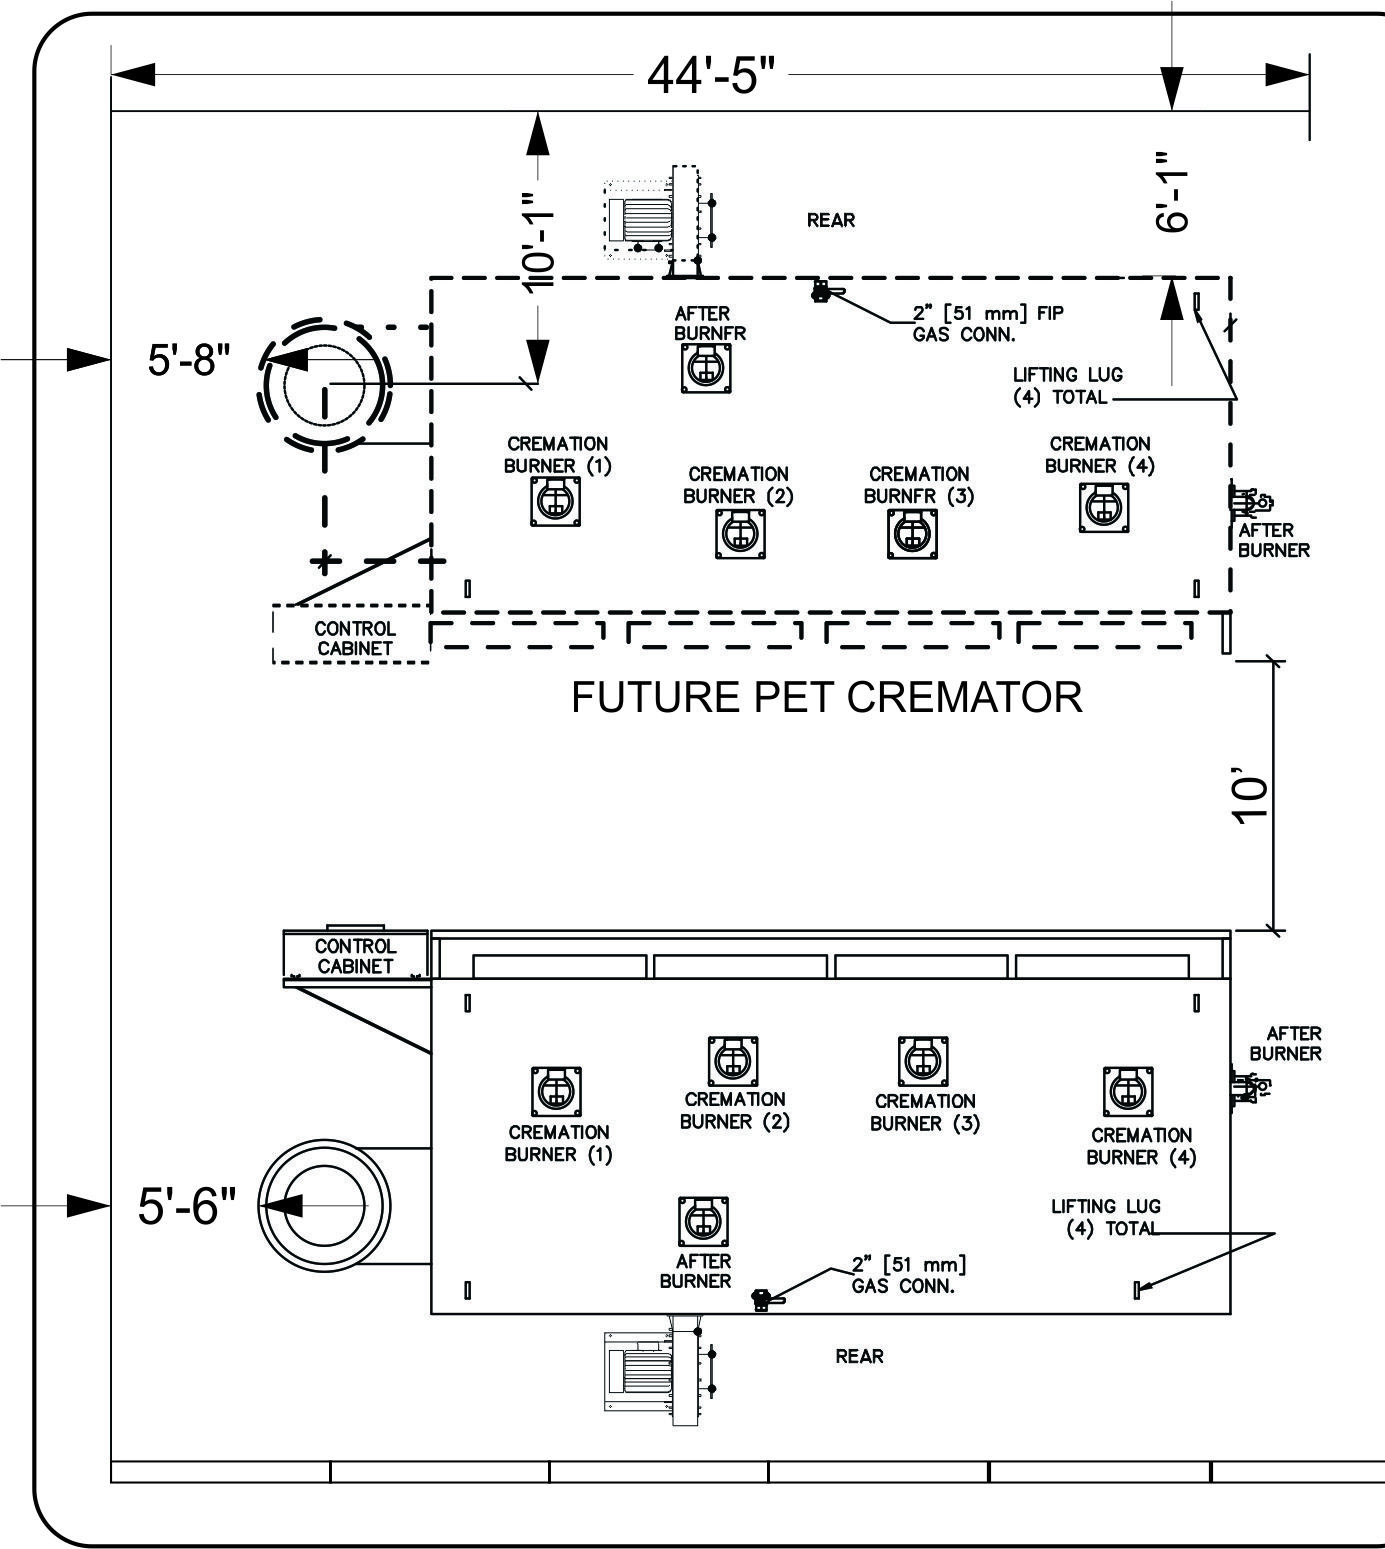 Engineering Drawing of a Crematory